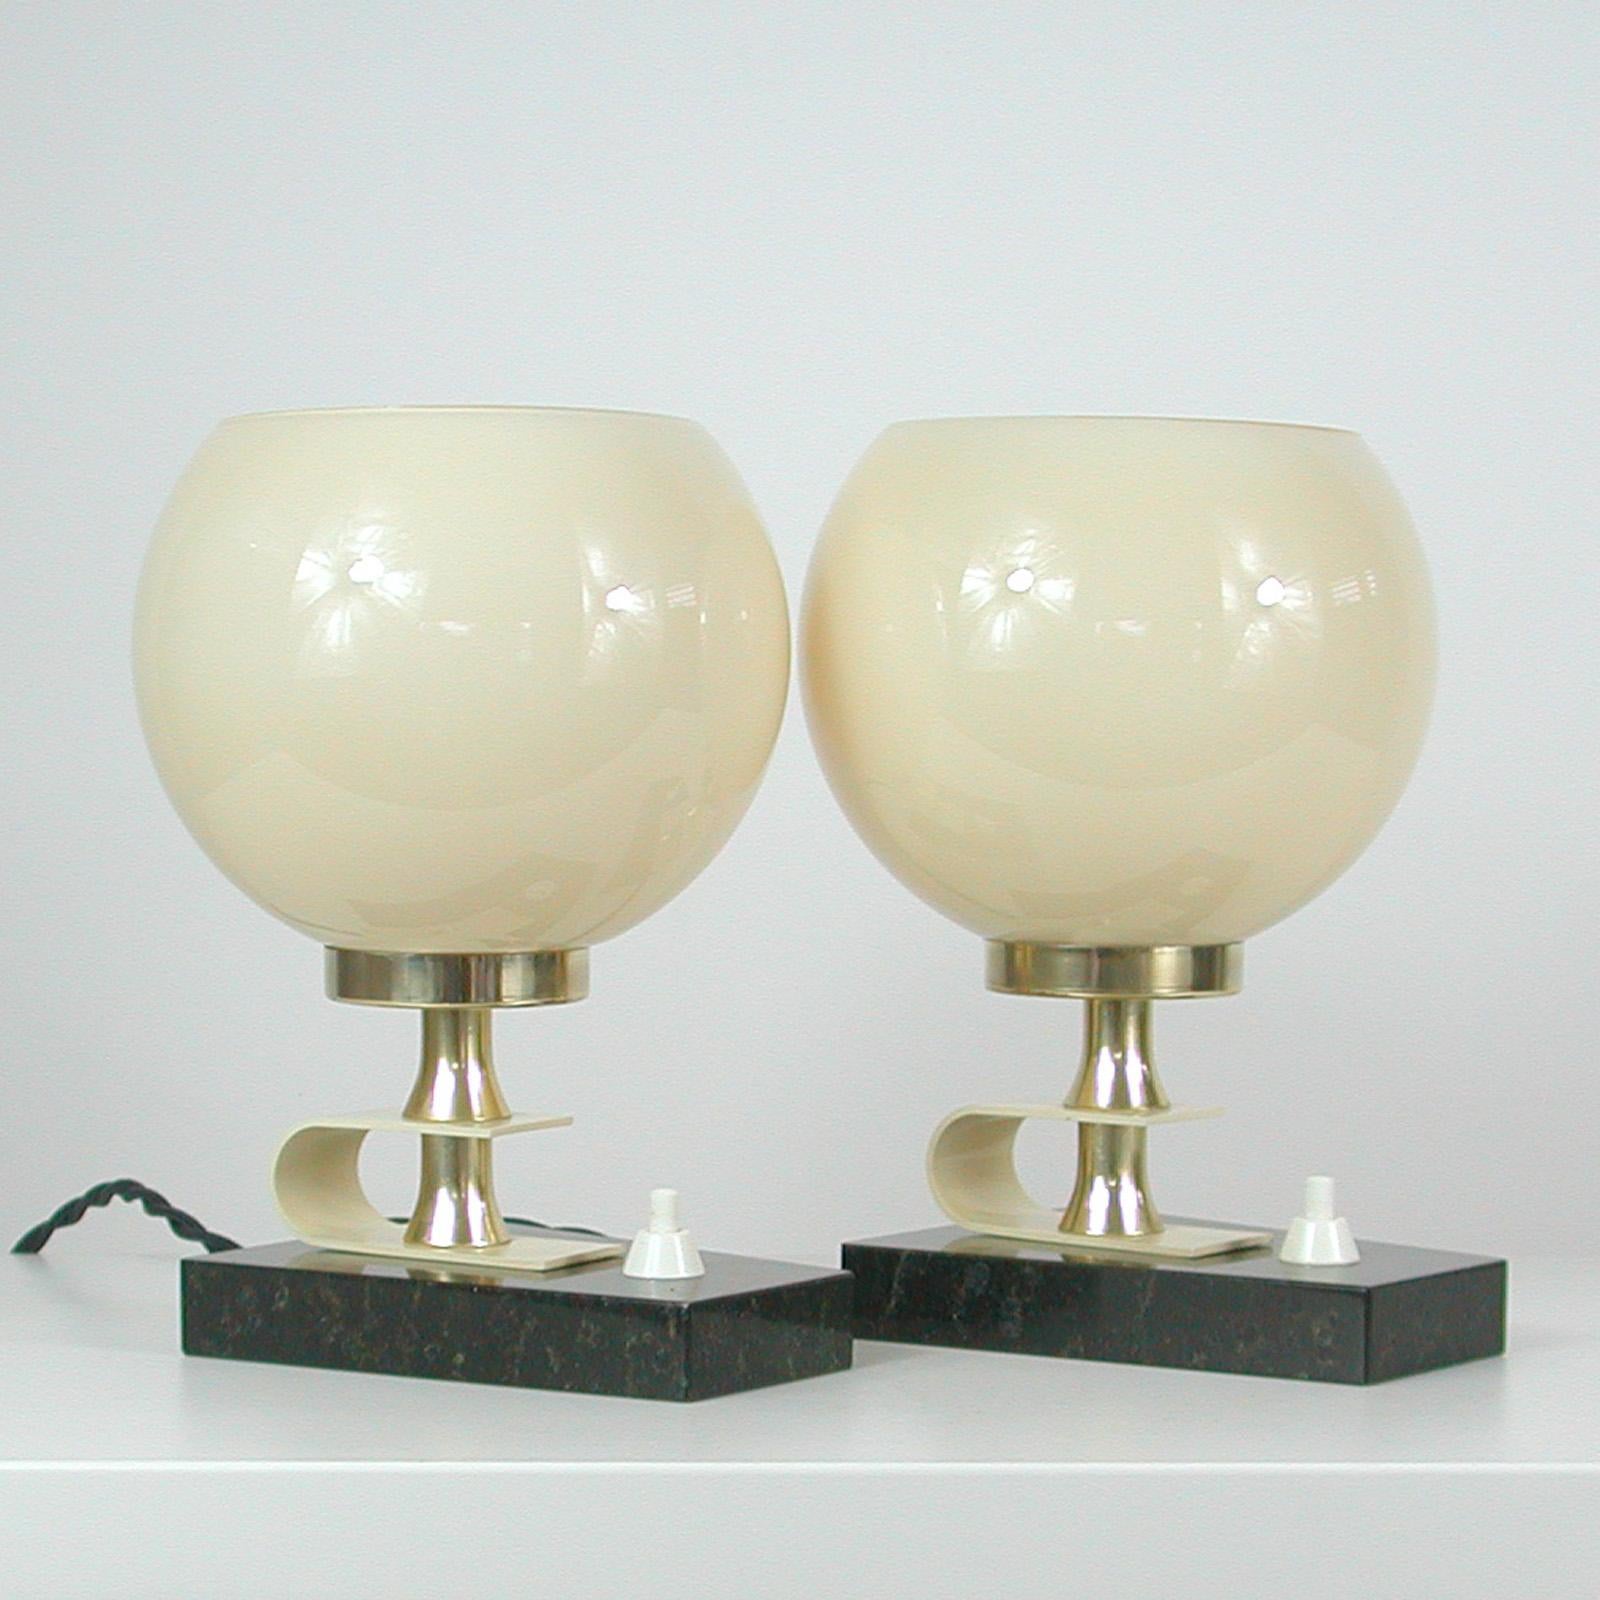 This beautiful modernist set of table or bedside lamps was designed and manufactured in Sweden in the late 1940s to 1950s.

The lights feature black marble bases, ball shaped ivory colored opaline lamp shades and brass hardware. Both have been